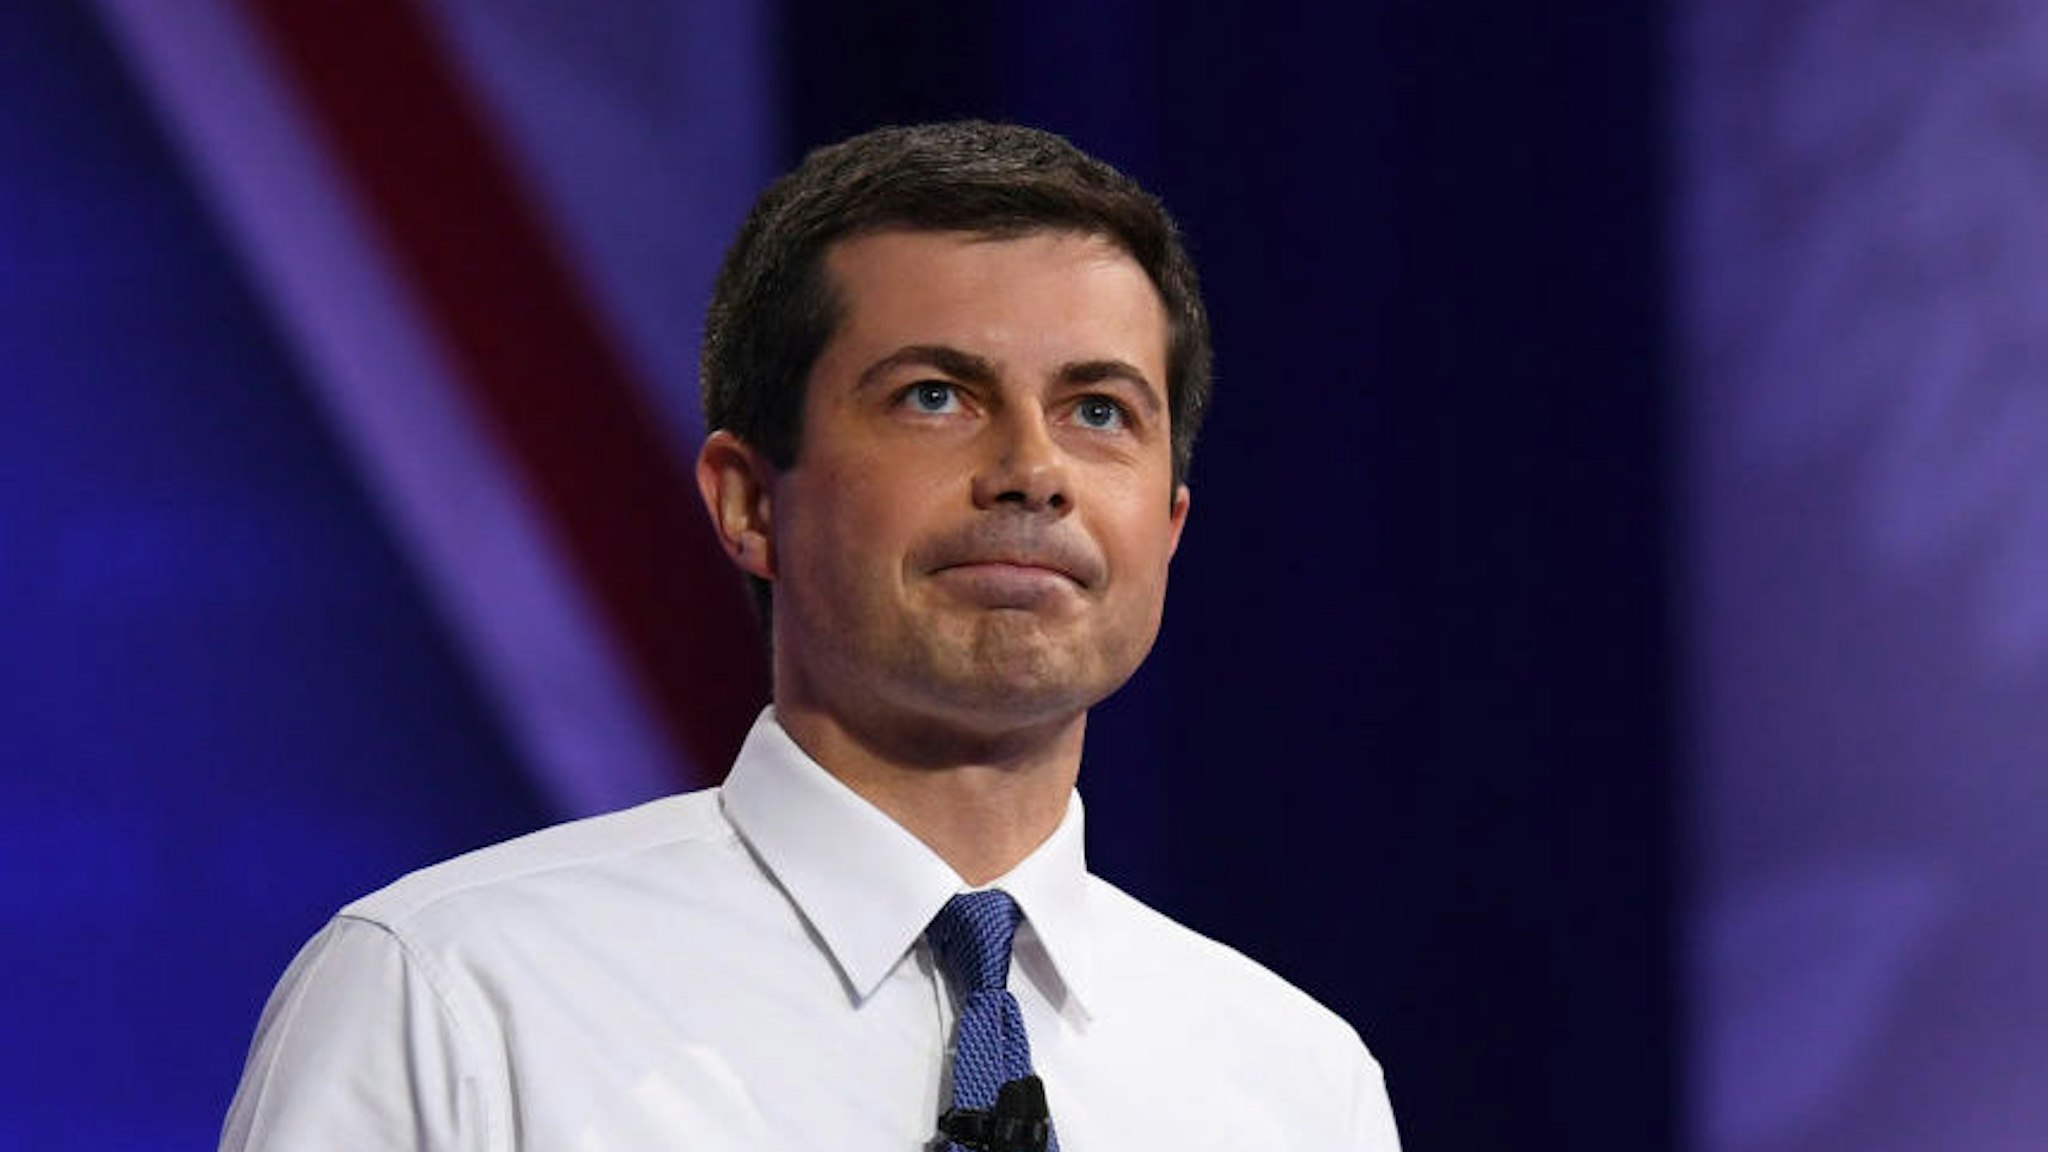 Democratic presidential hopeful Mayor of South Bend, Indiana Pete Buttigieg looks on during a town hall devoted to LGBTQ issues hosted by CNN and the Human rights Campaign Foundation at The Novo in Los Angeles on October 10, 2019.